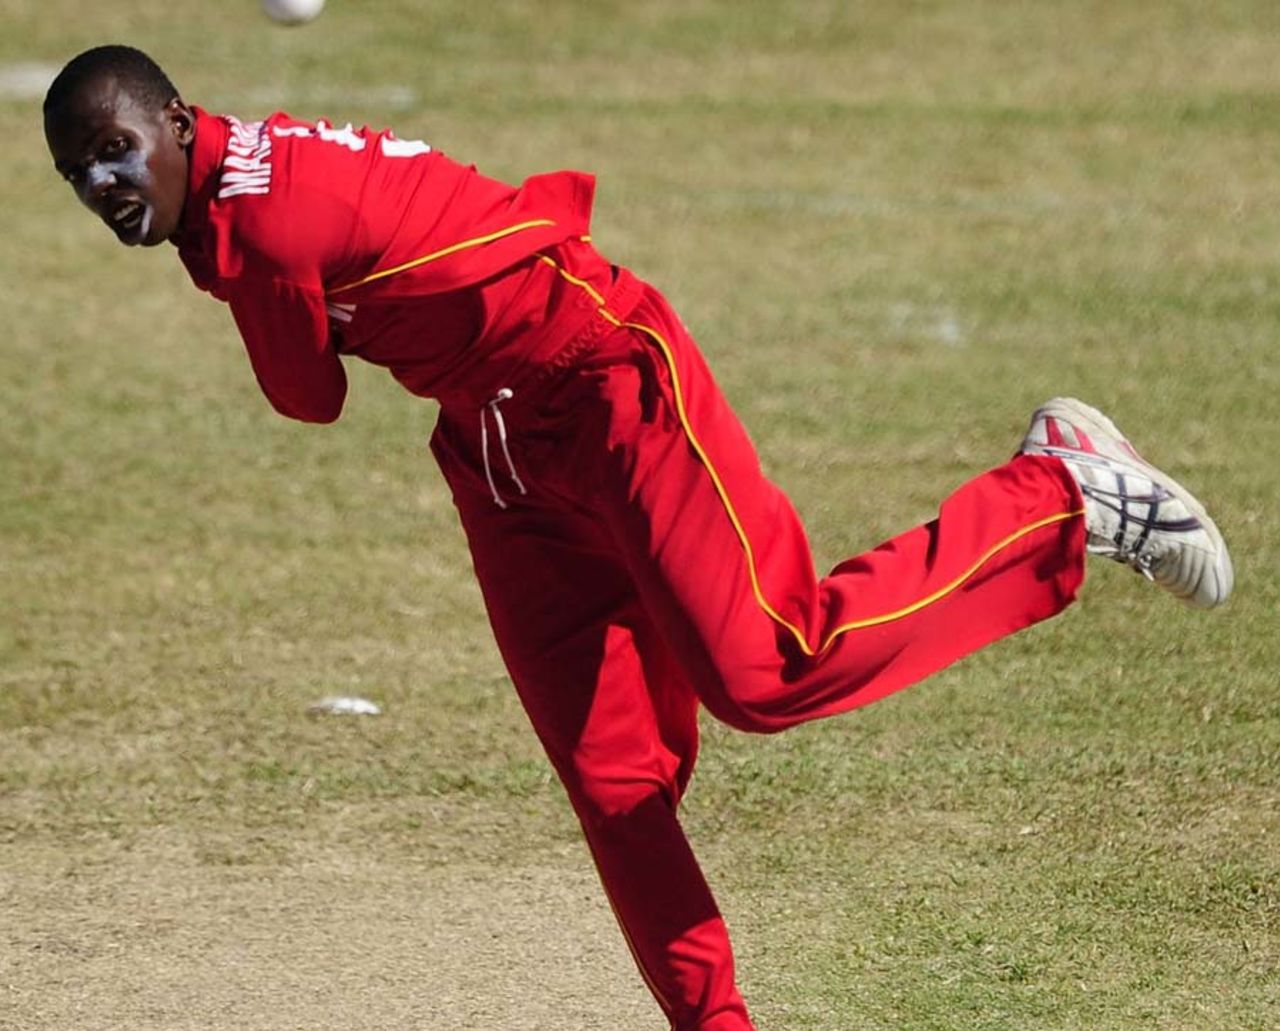 Wellington Masakadza managed to take a wicket but West Indies secured a comfortable victory, West Indies v Zimbabwe, Group C, ICC Under-19 World Cup, Townsville, August 16, 2012